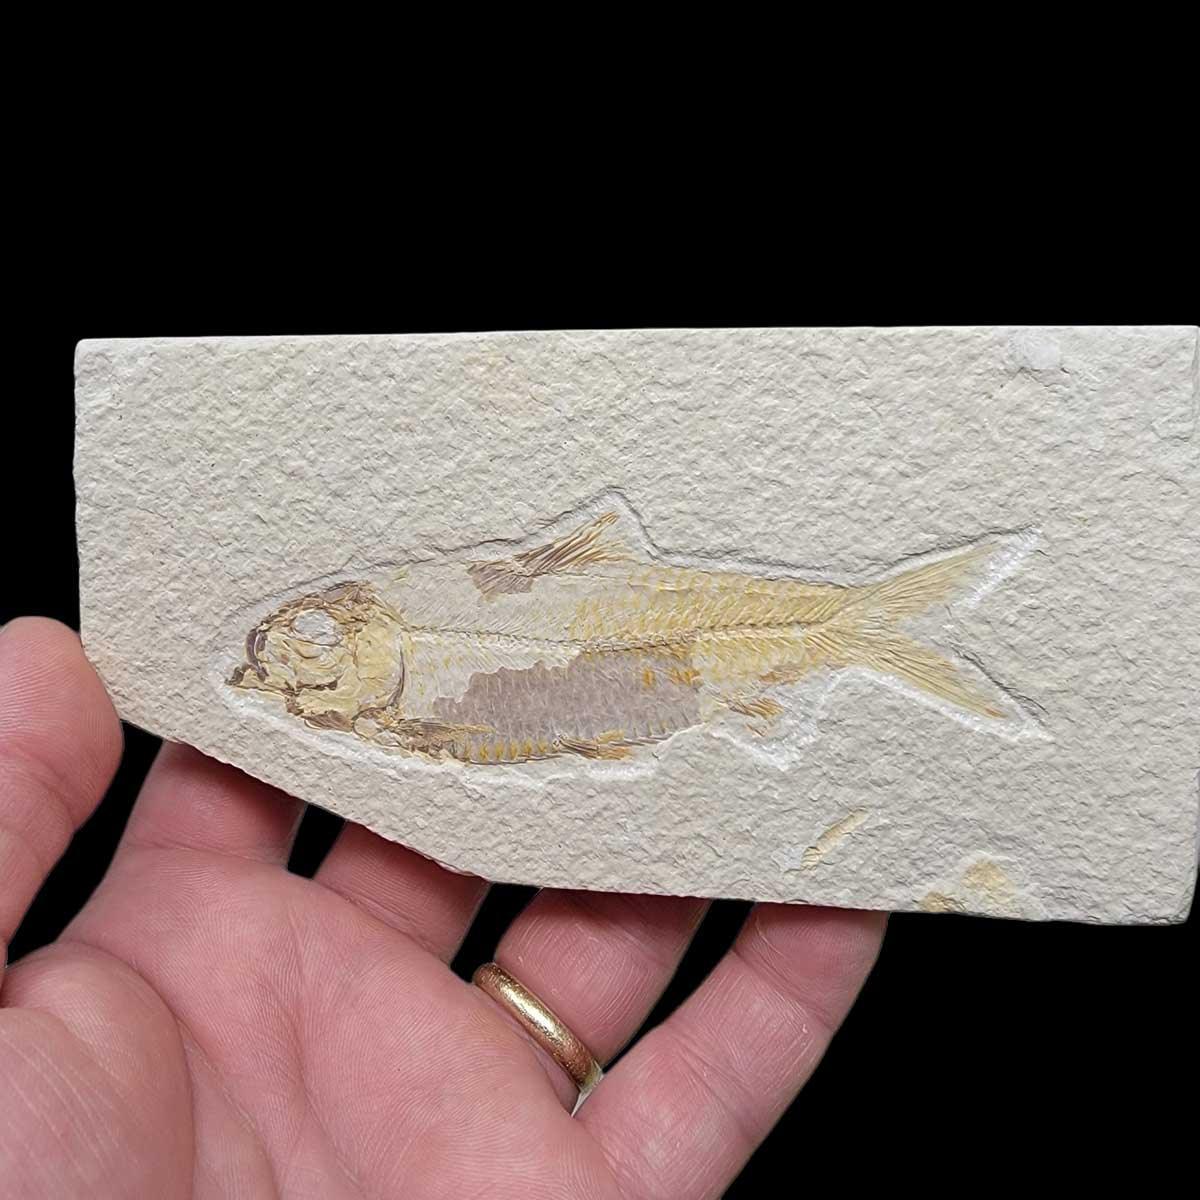 Fossil Knightia Fish Plate Fossil Specimen! 90% Whole and completely authentic! - LapidaryCentral